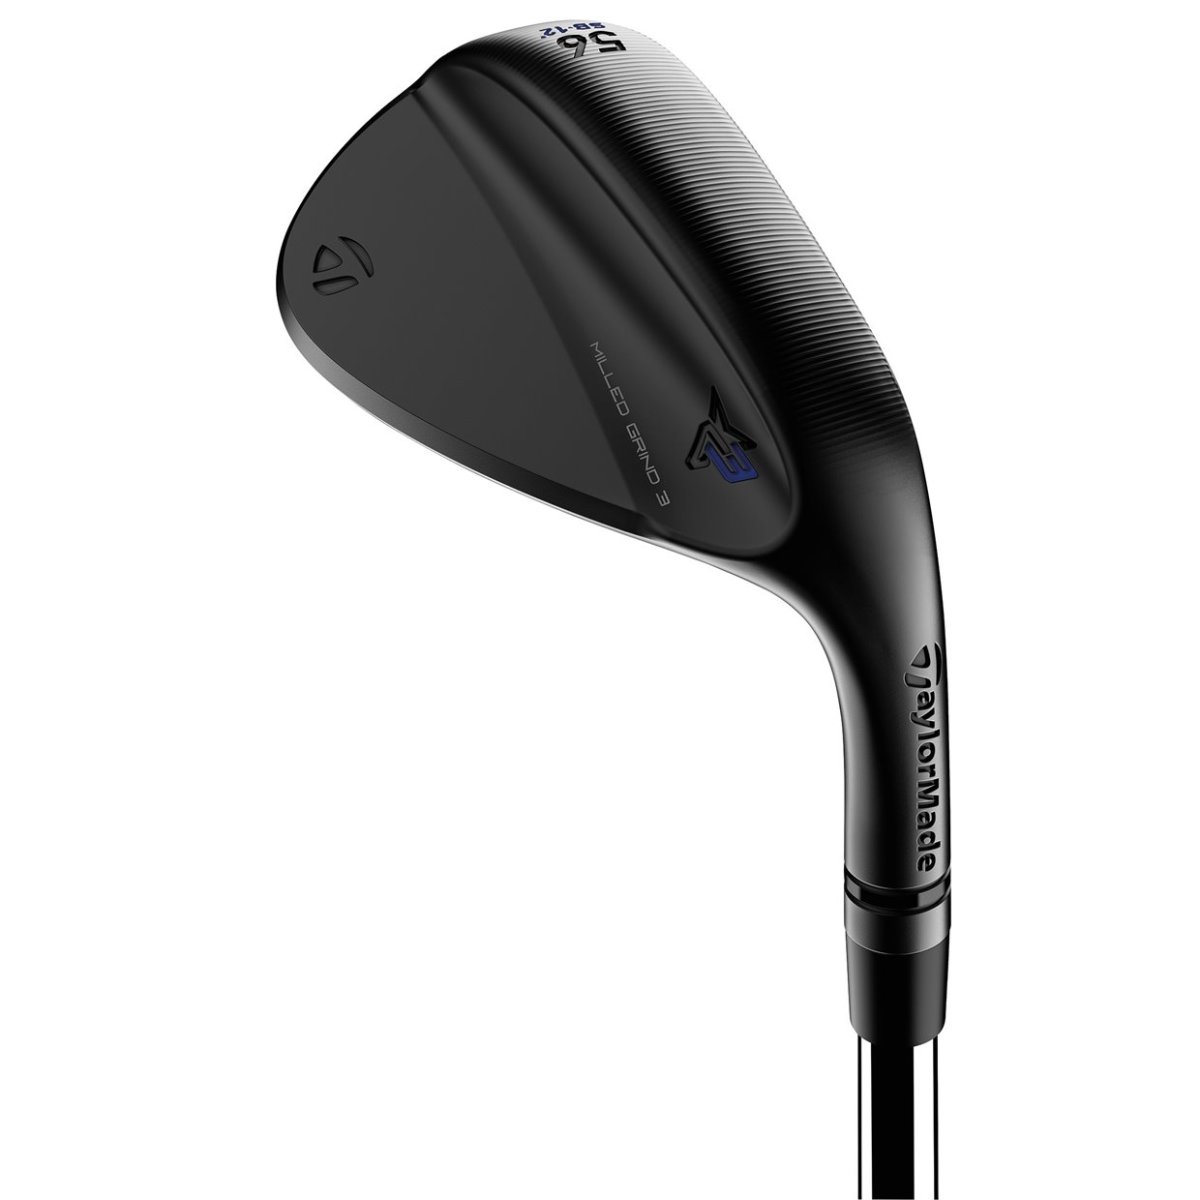 Shop the latest TaylorMade golf wedges, like the MG3, on Morning Read's online pro shop, powered by GlobalGolf.